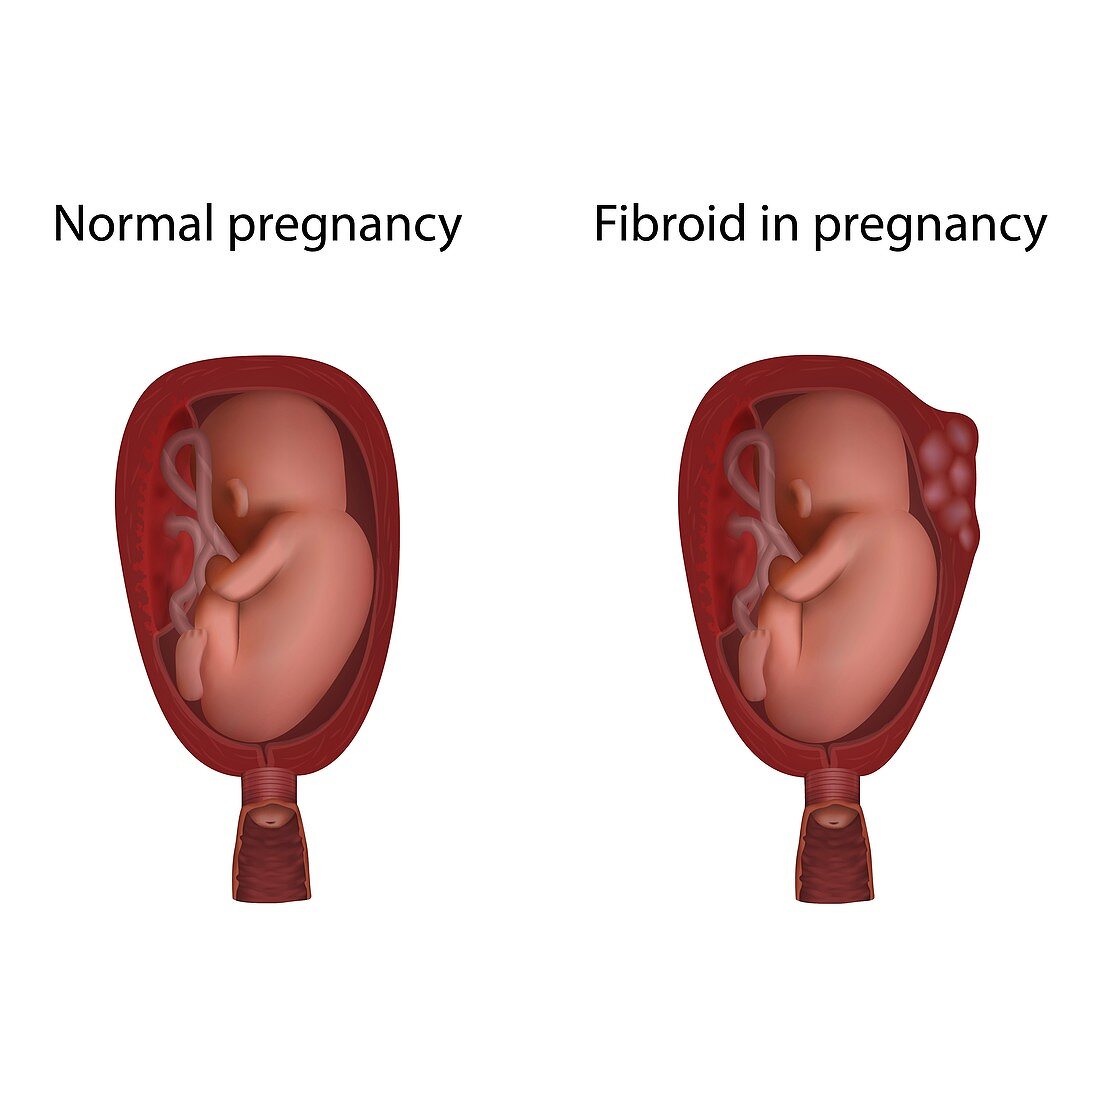 Fibroid in pregnancy and normal pregnancy, illustration